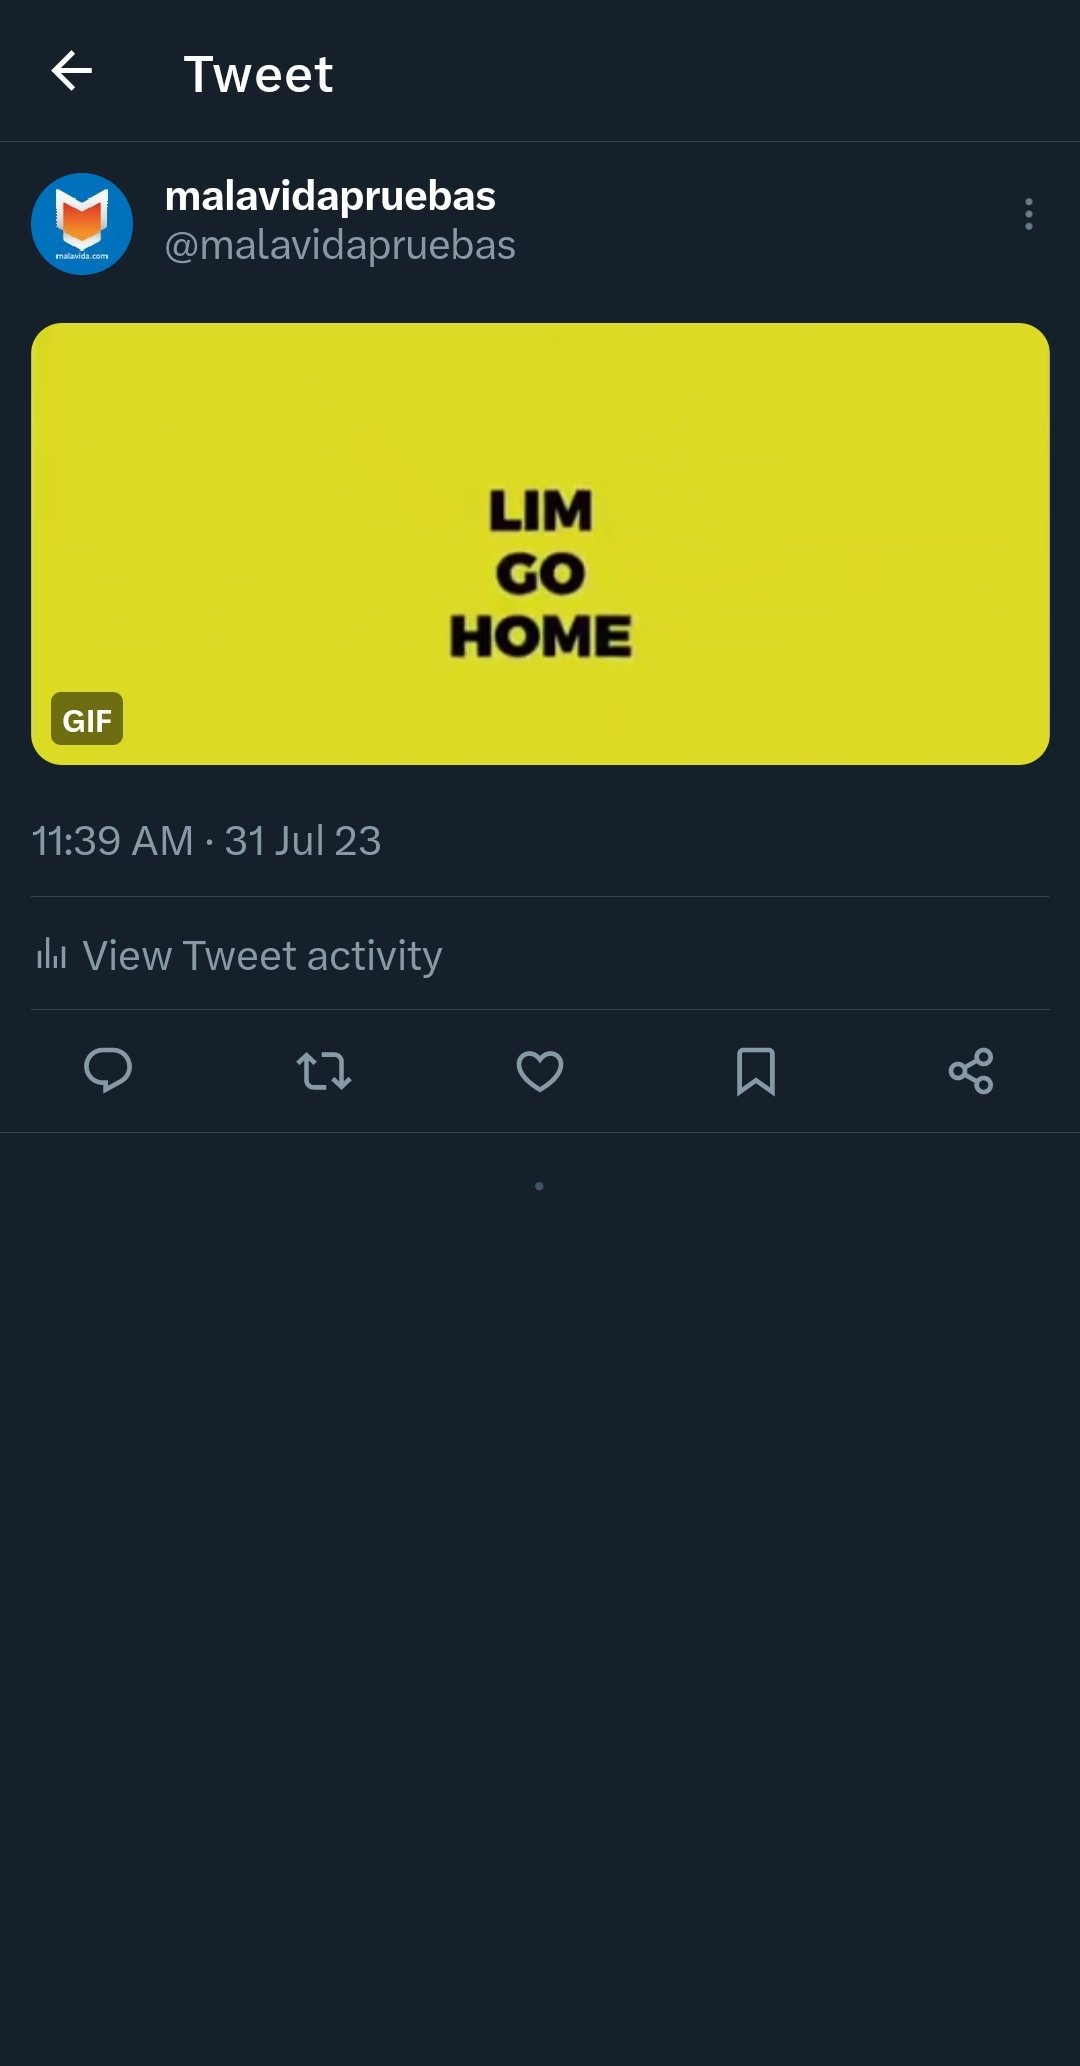 Download Twitter Videos - GIF APK for Android Download